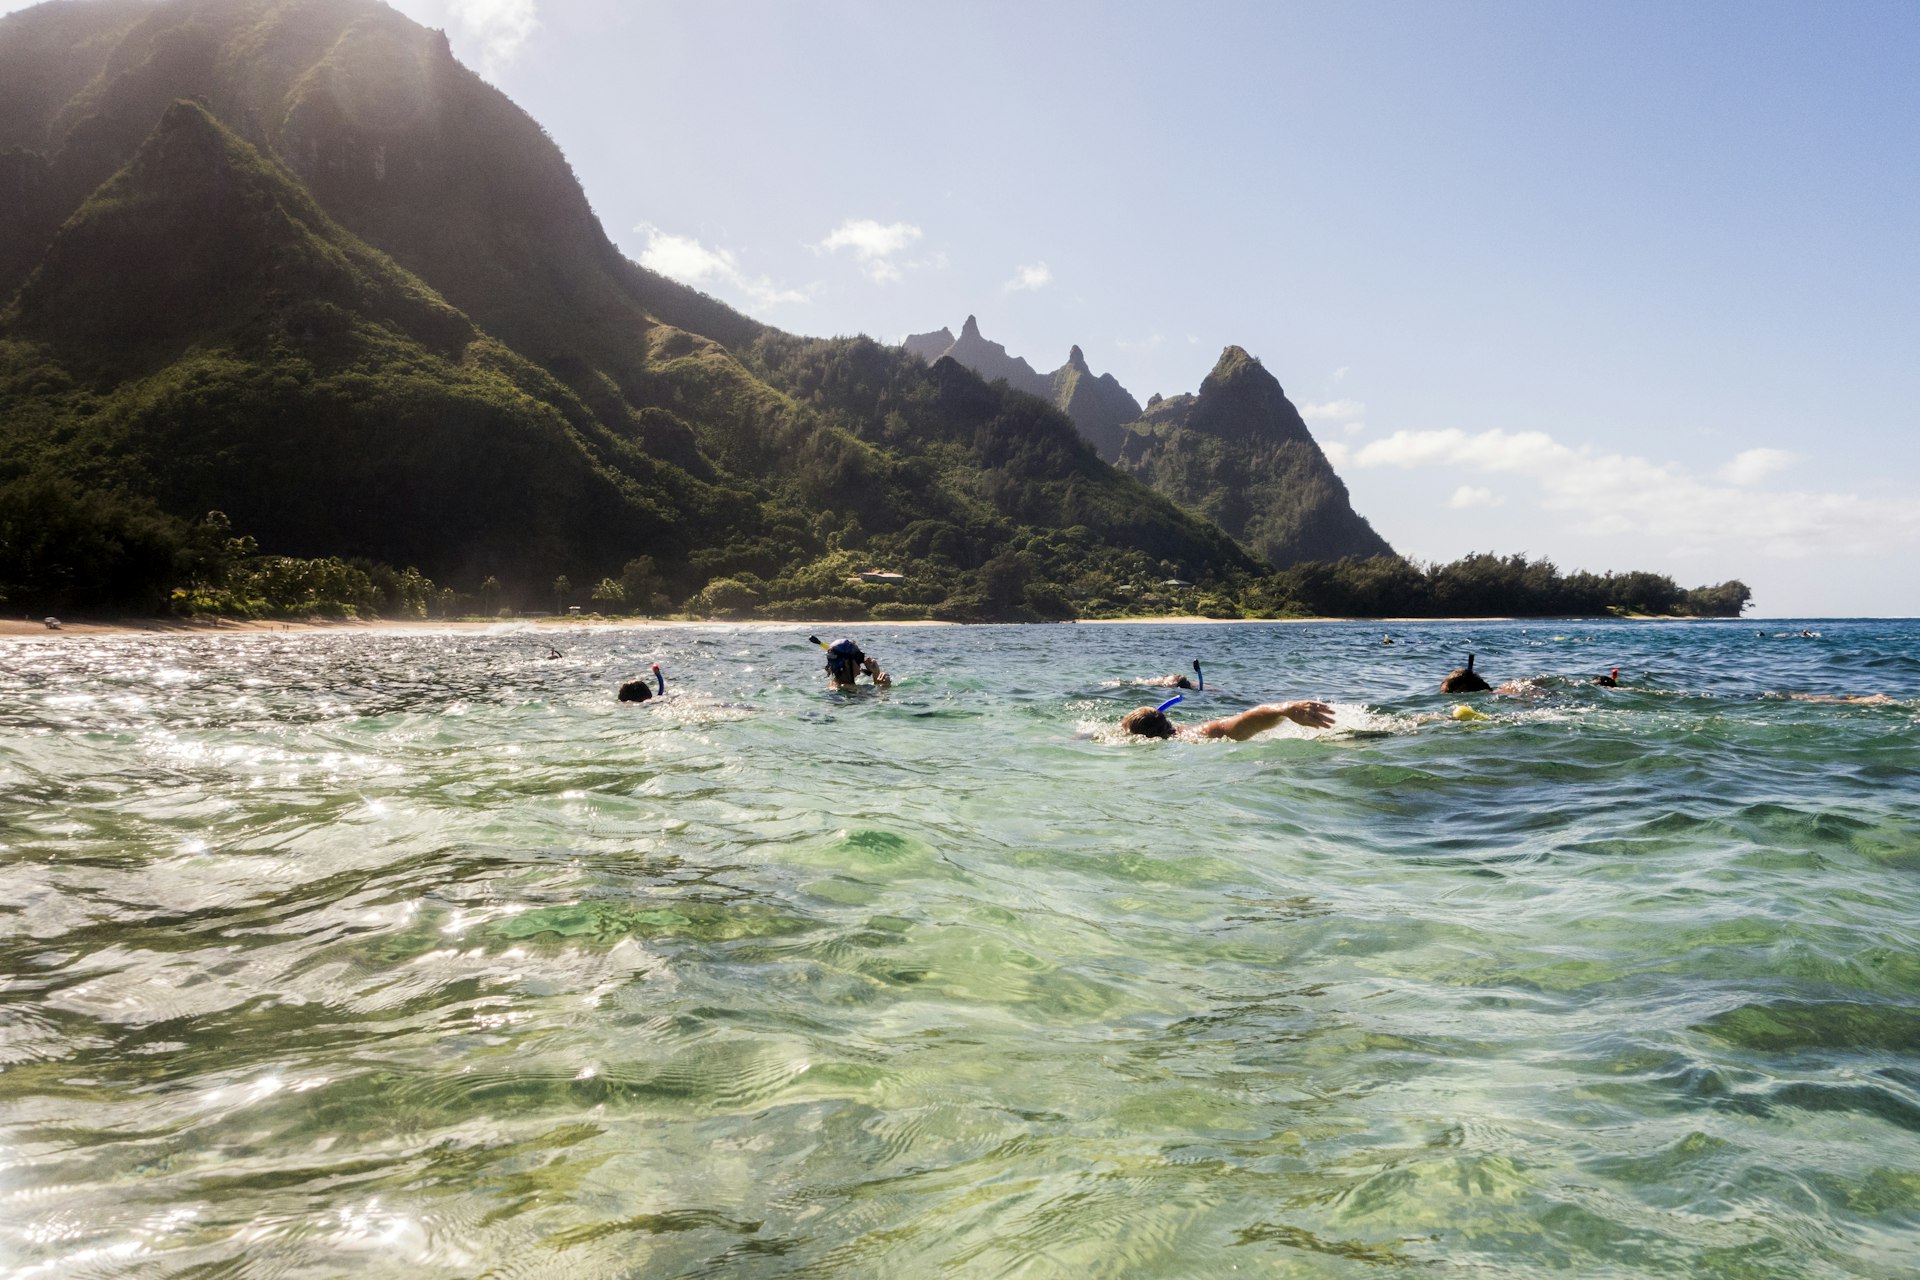 A group of people scuba diving and snorkeling off the coast of Kaua‘i on a sunny day with dramatic cliffs in the distance